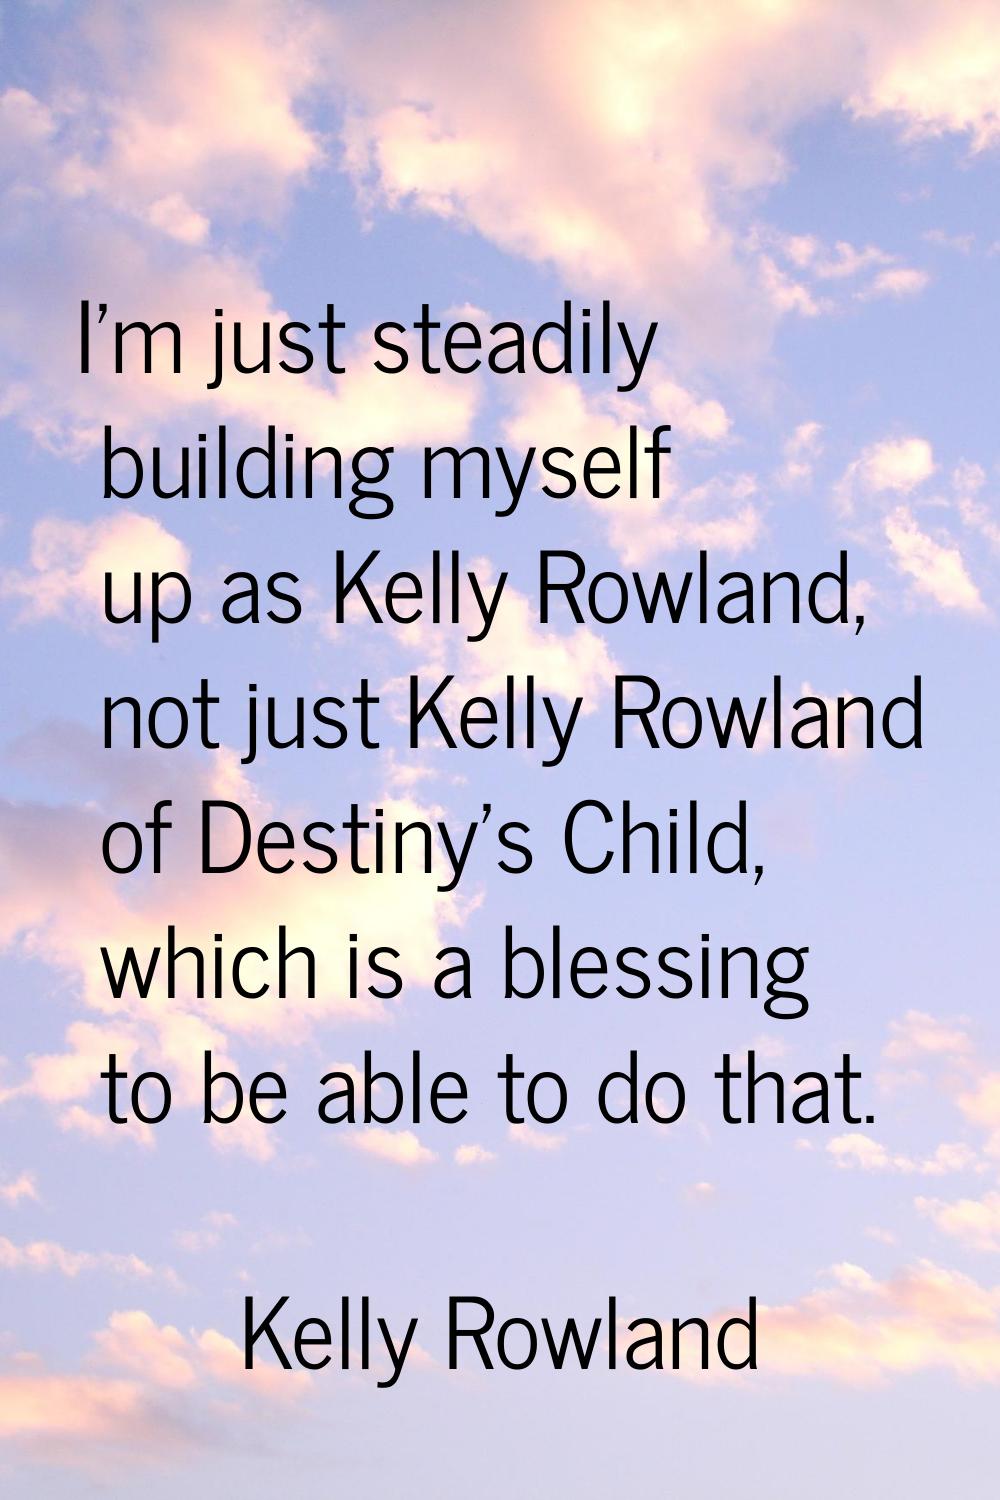 I'm just steadily building myself up as Kelly Rowland, not just Kelly Rowland of Destiny's Child, w